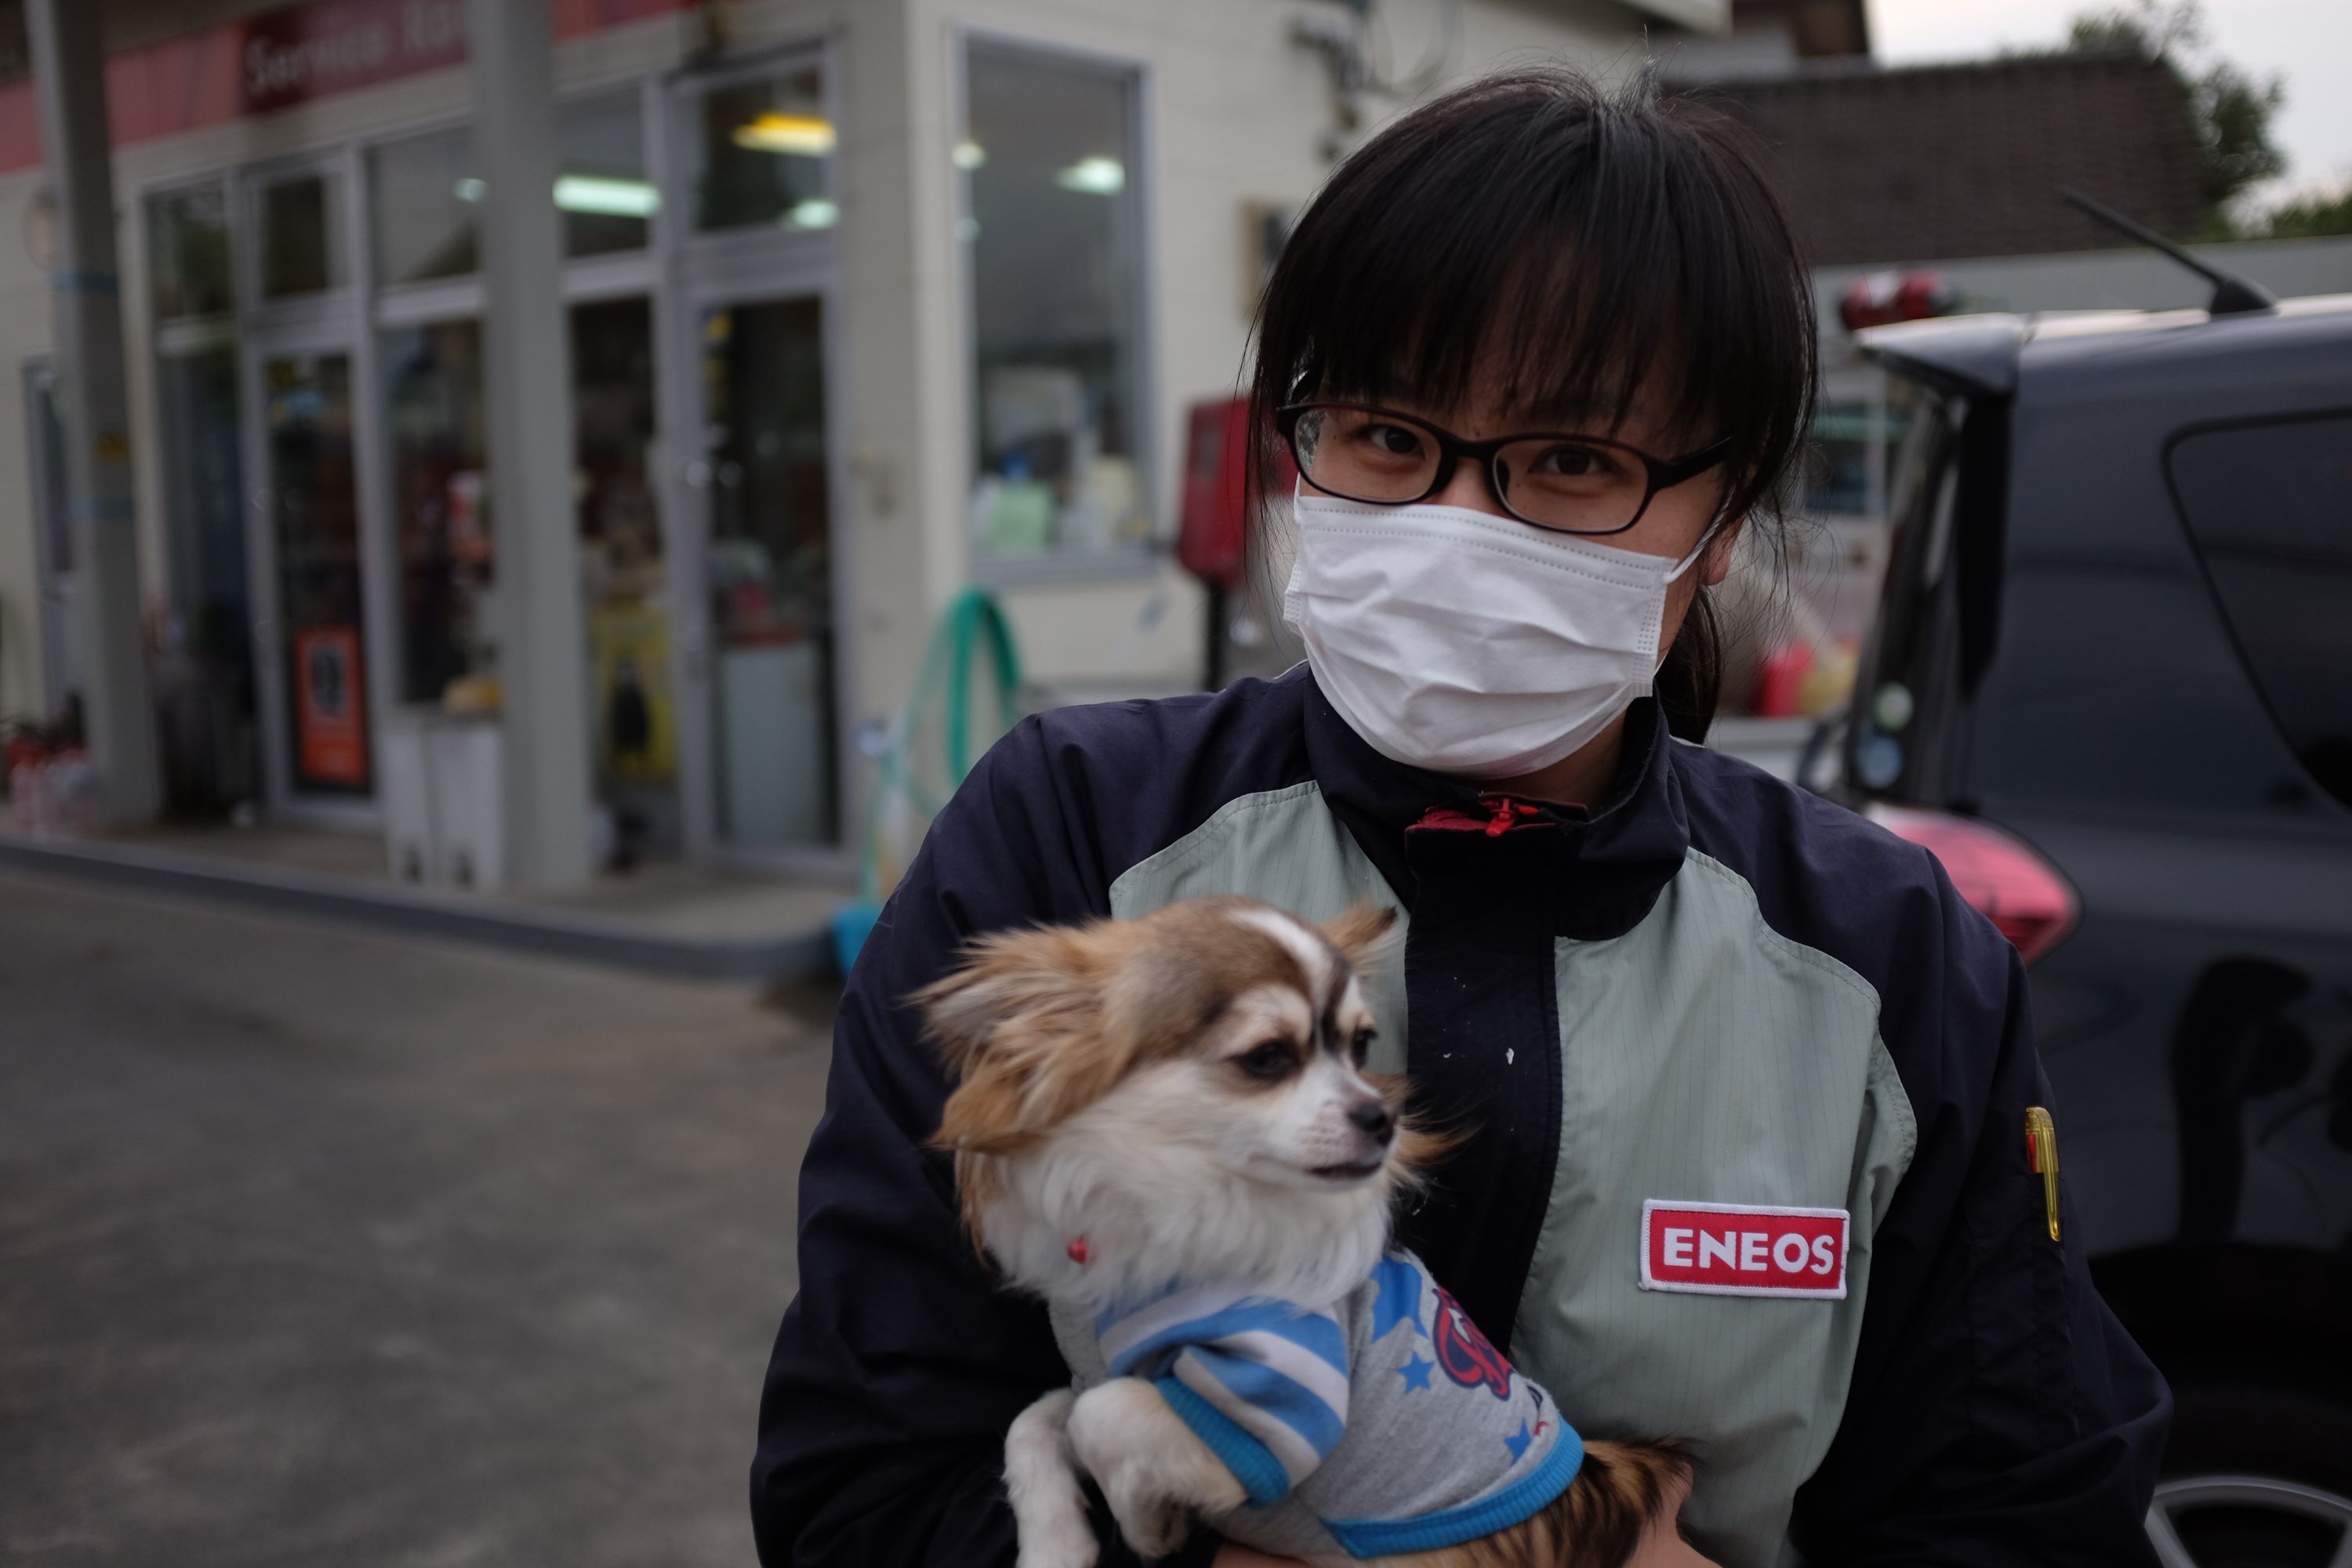 A woman wearing a surgical mask and mechanic’s overalls holds a small dog who wears a striped jumper.